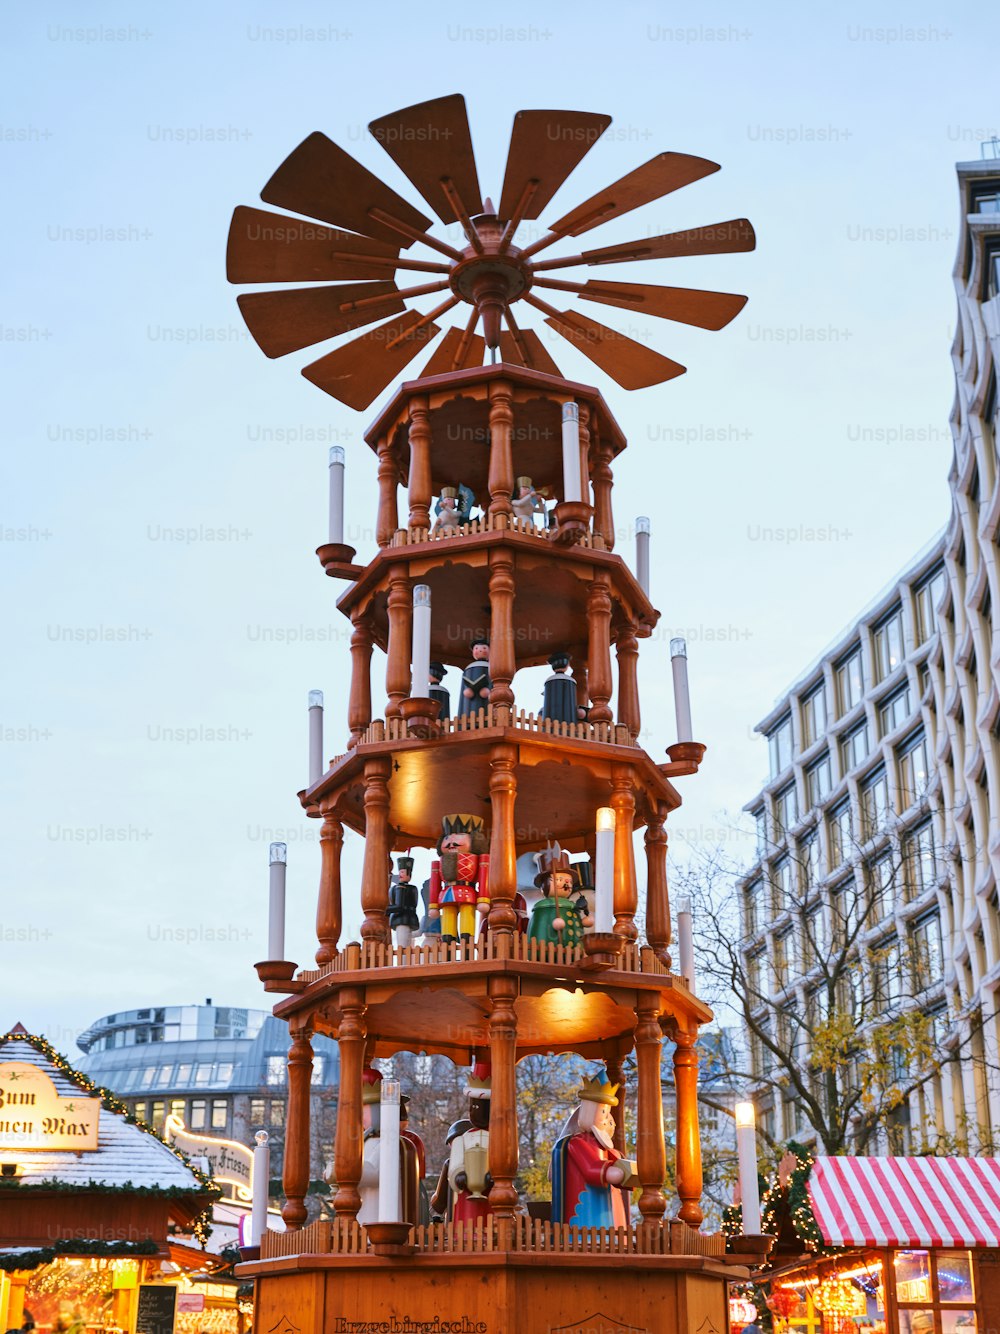 a large wooden clock tower with candles on top of it